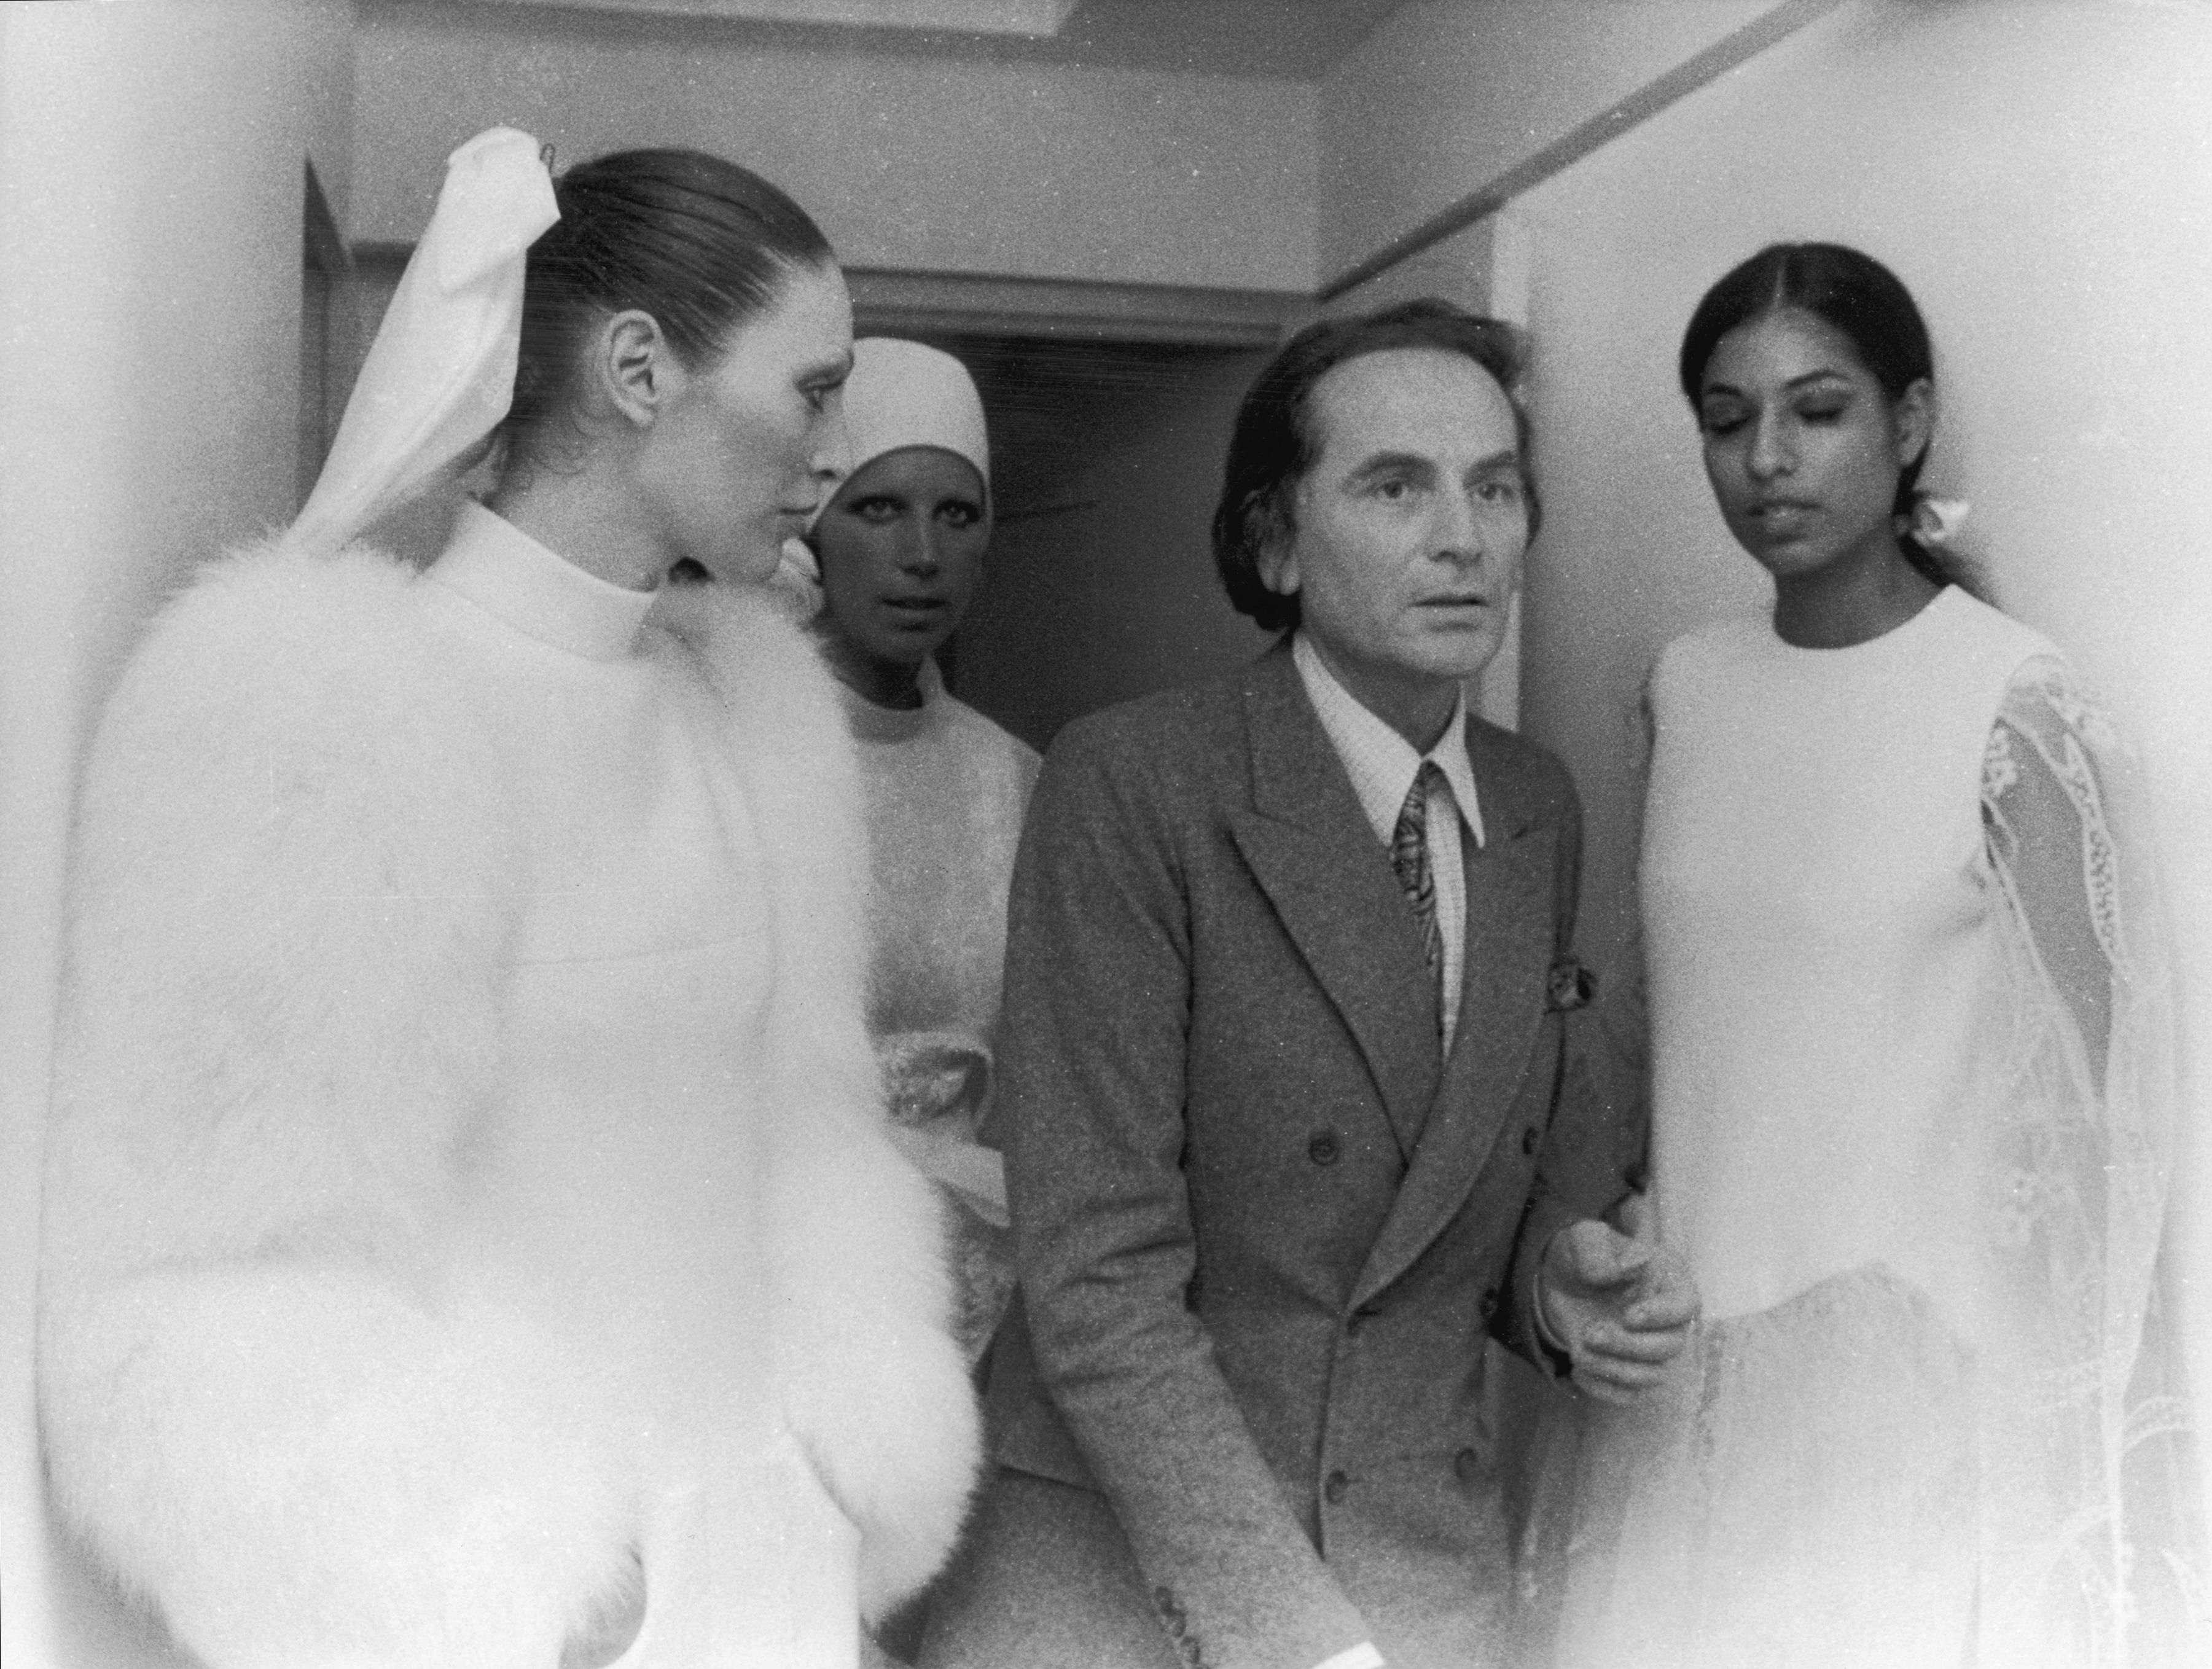 Pierre Cardin, French Italian designer who once owned Notre Dame and Eiffel Towel